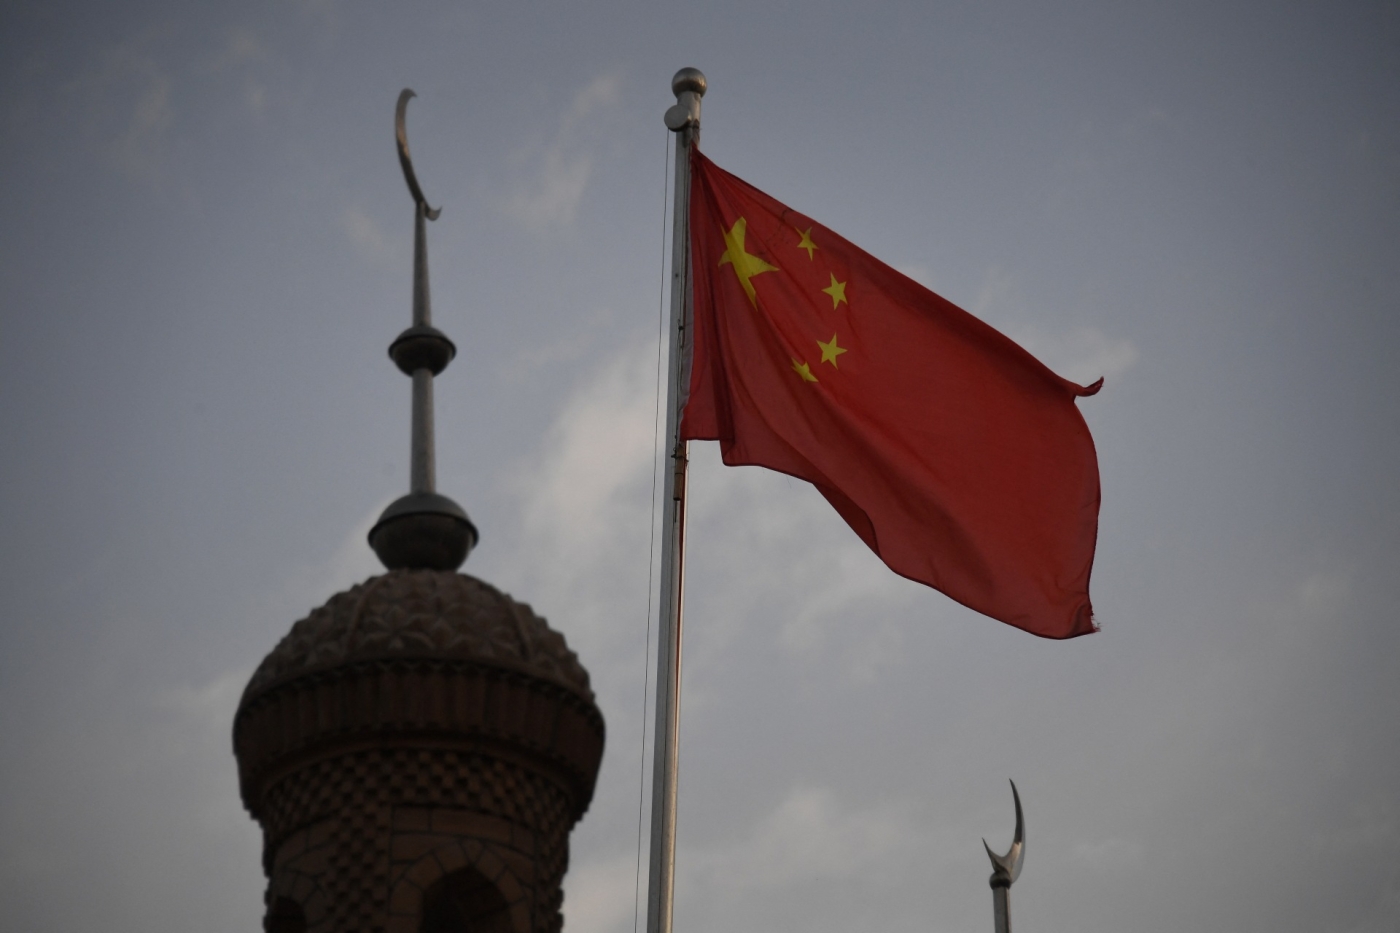 Muslim nations tilt towards China as US influence fades and Uyghurs ignored